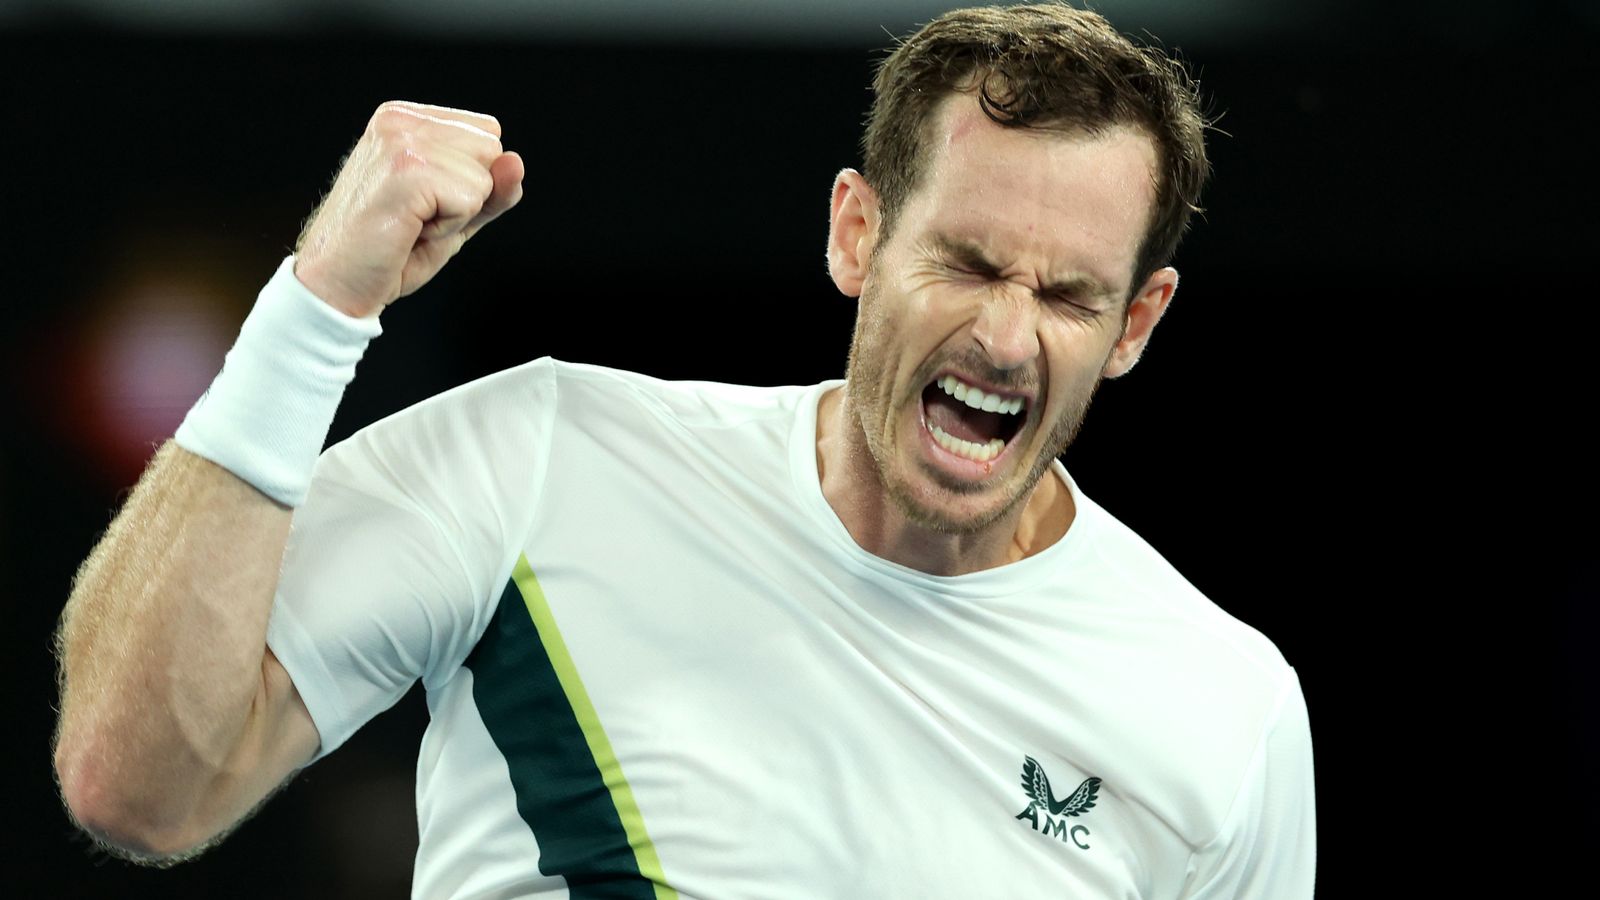 Australian Open: Andy Murray holds off Matteo Berrettini to win five-set epic in Melbourne | Tennis News